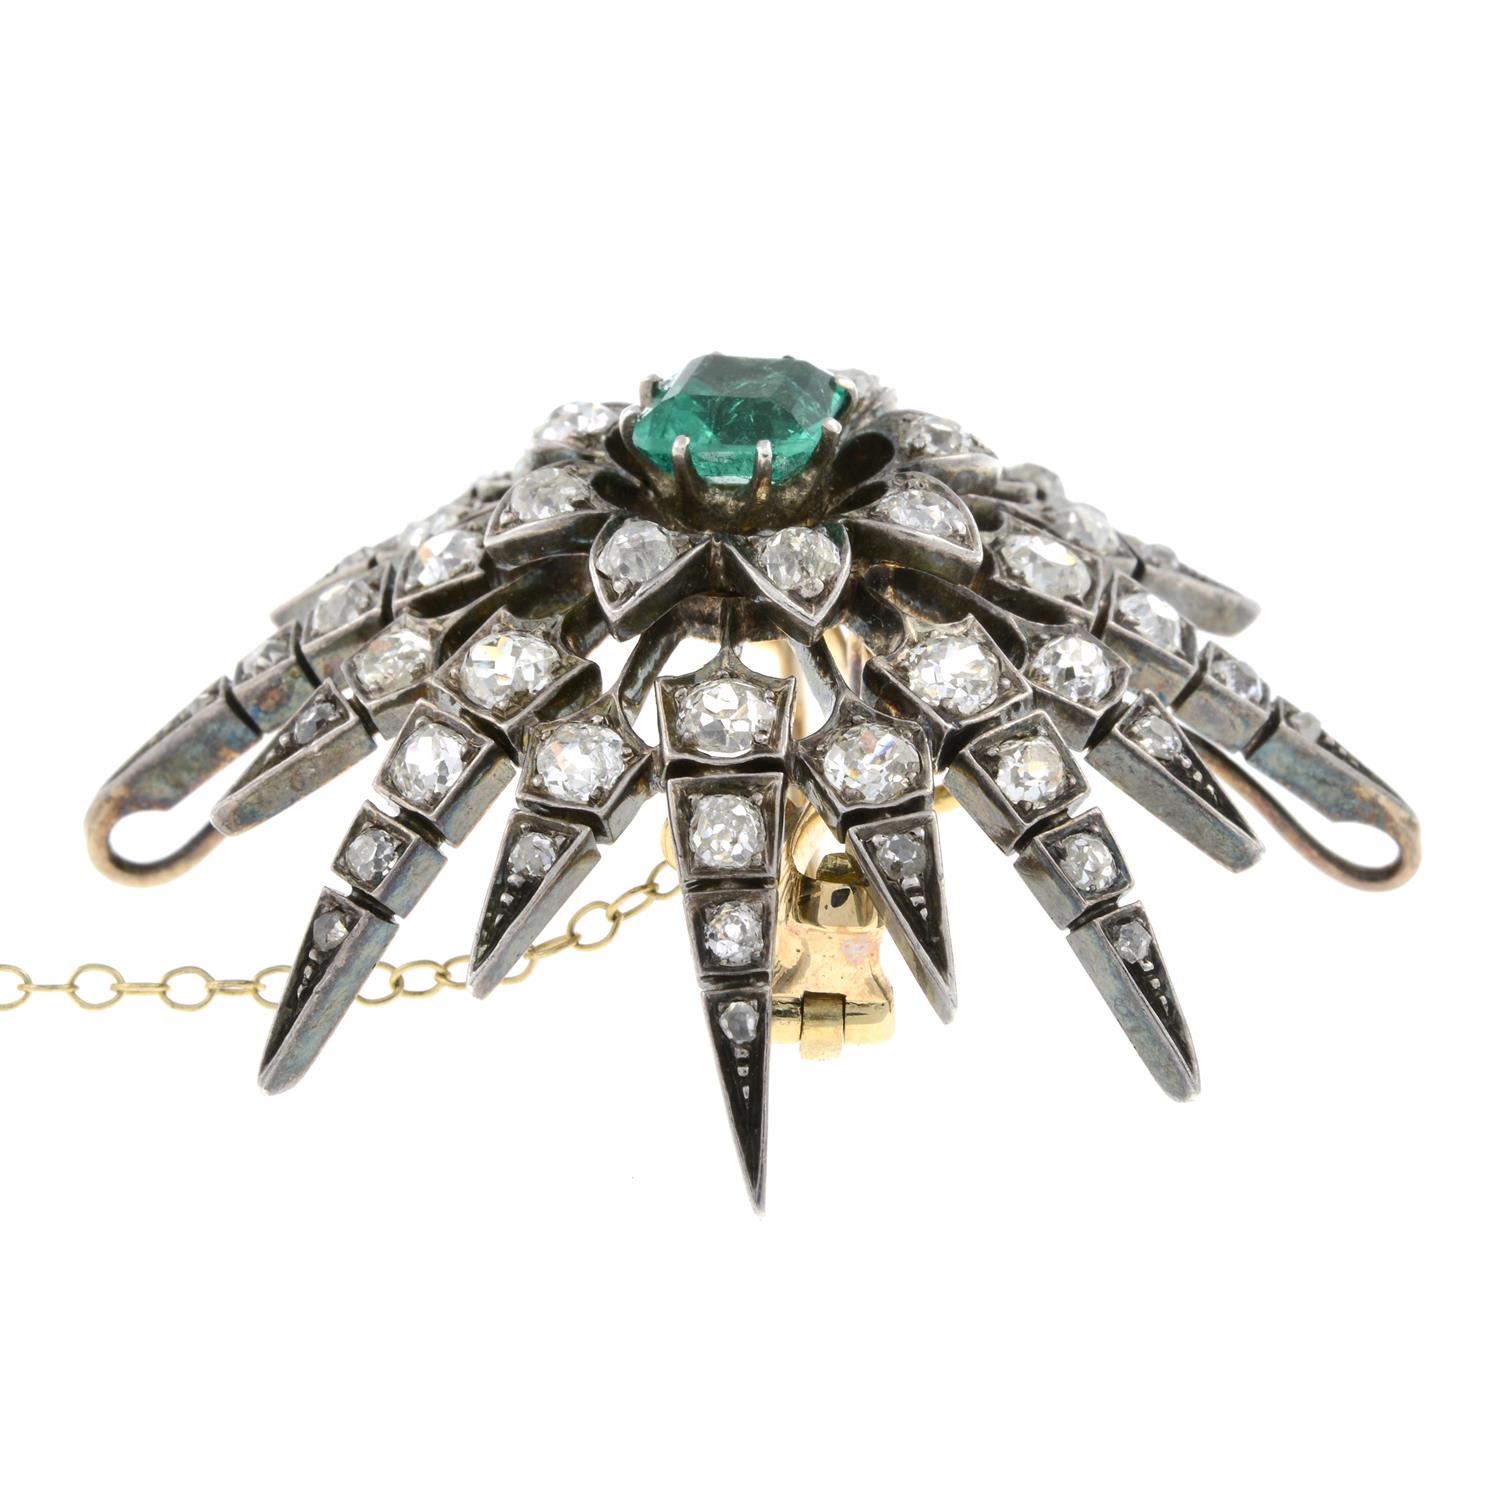 Victorian emerald and diamond star brooch - Image 4 of 5